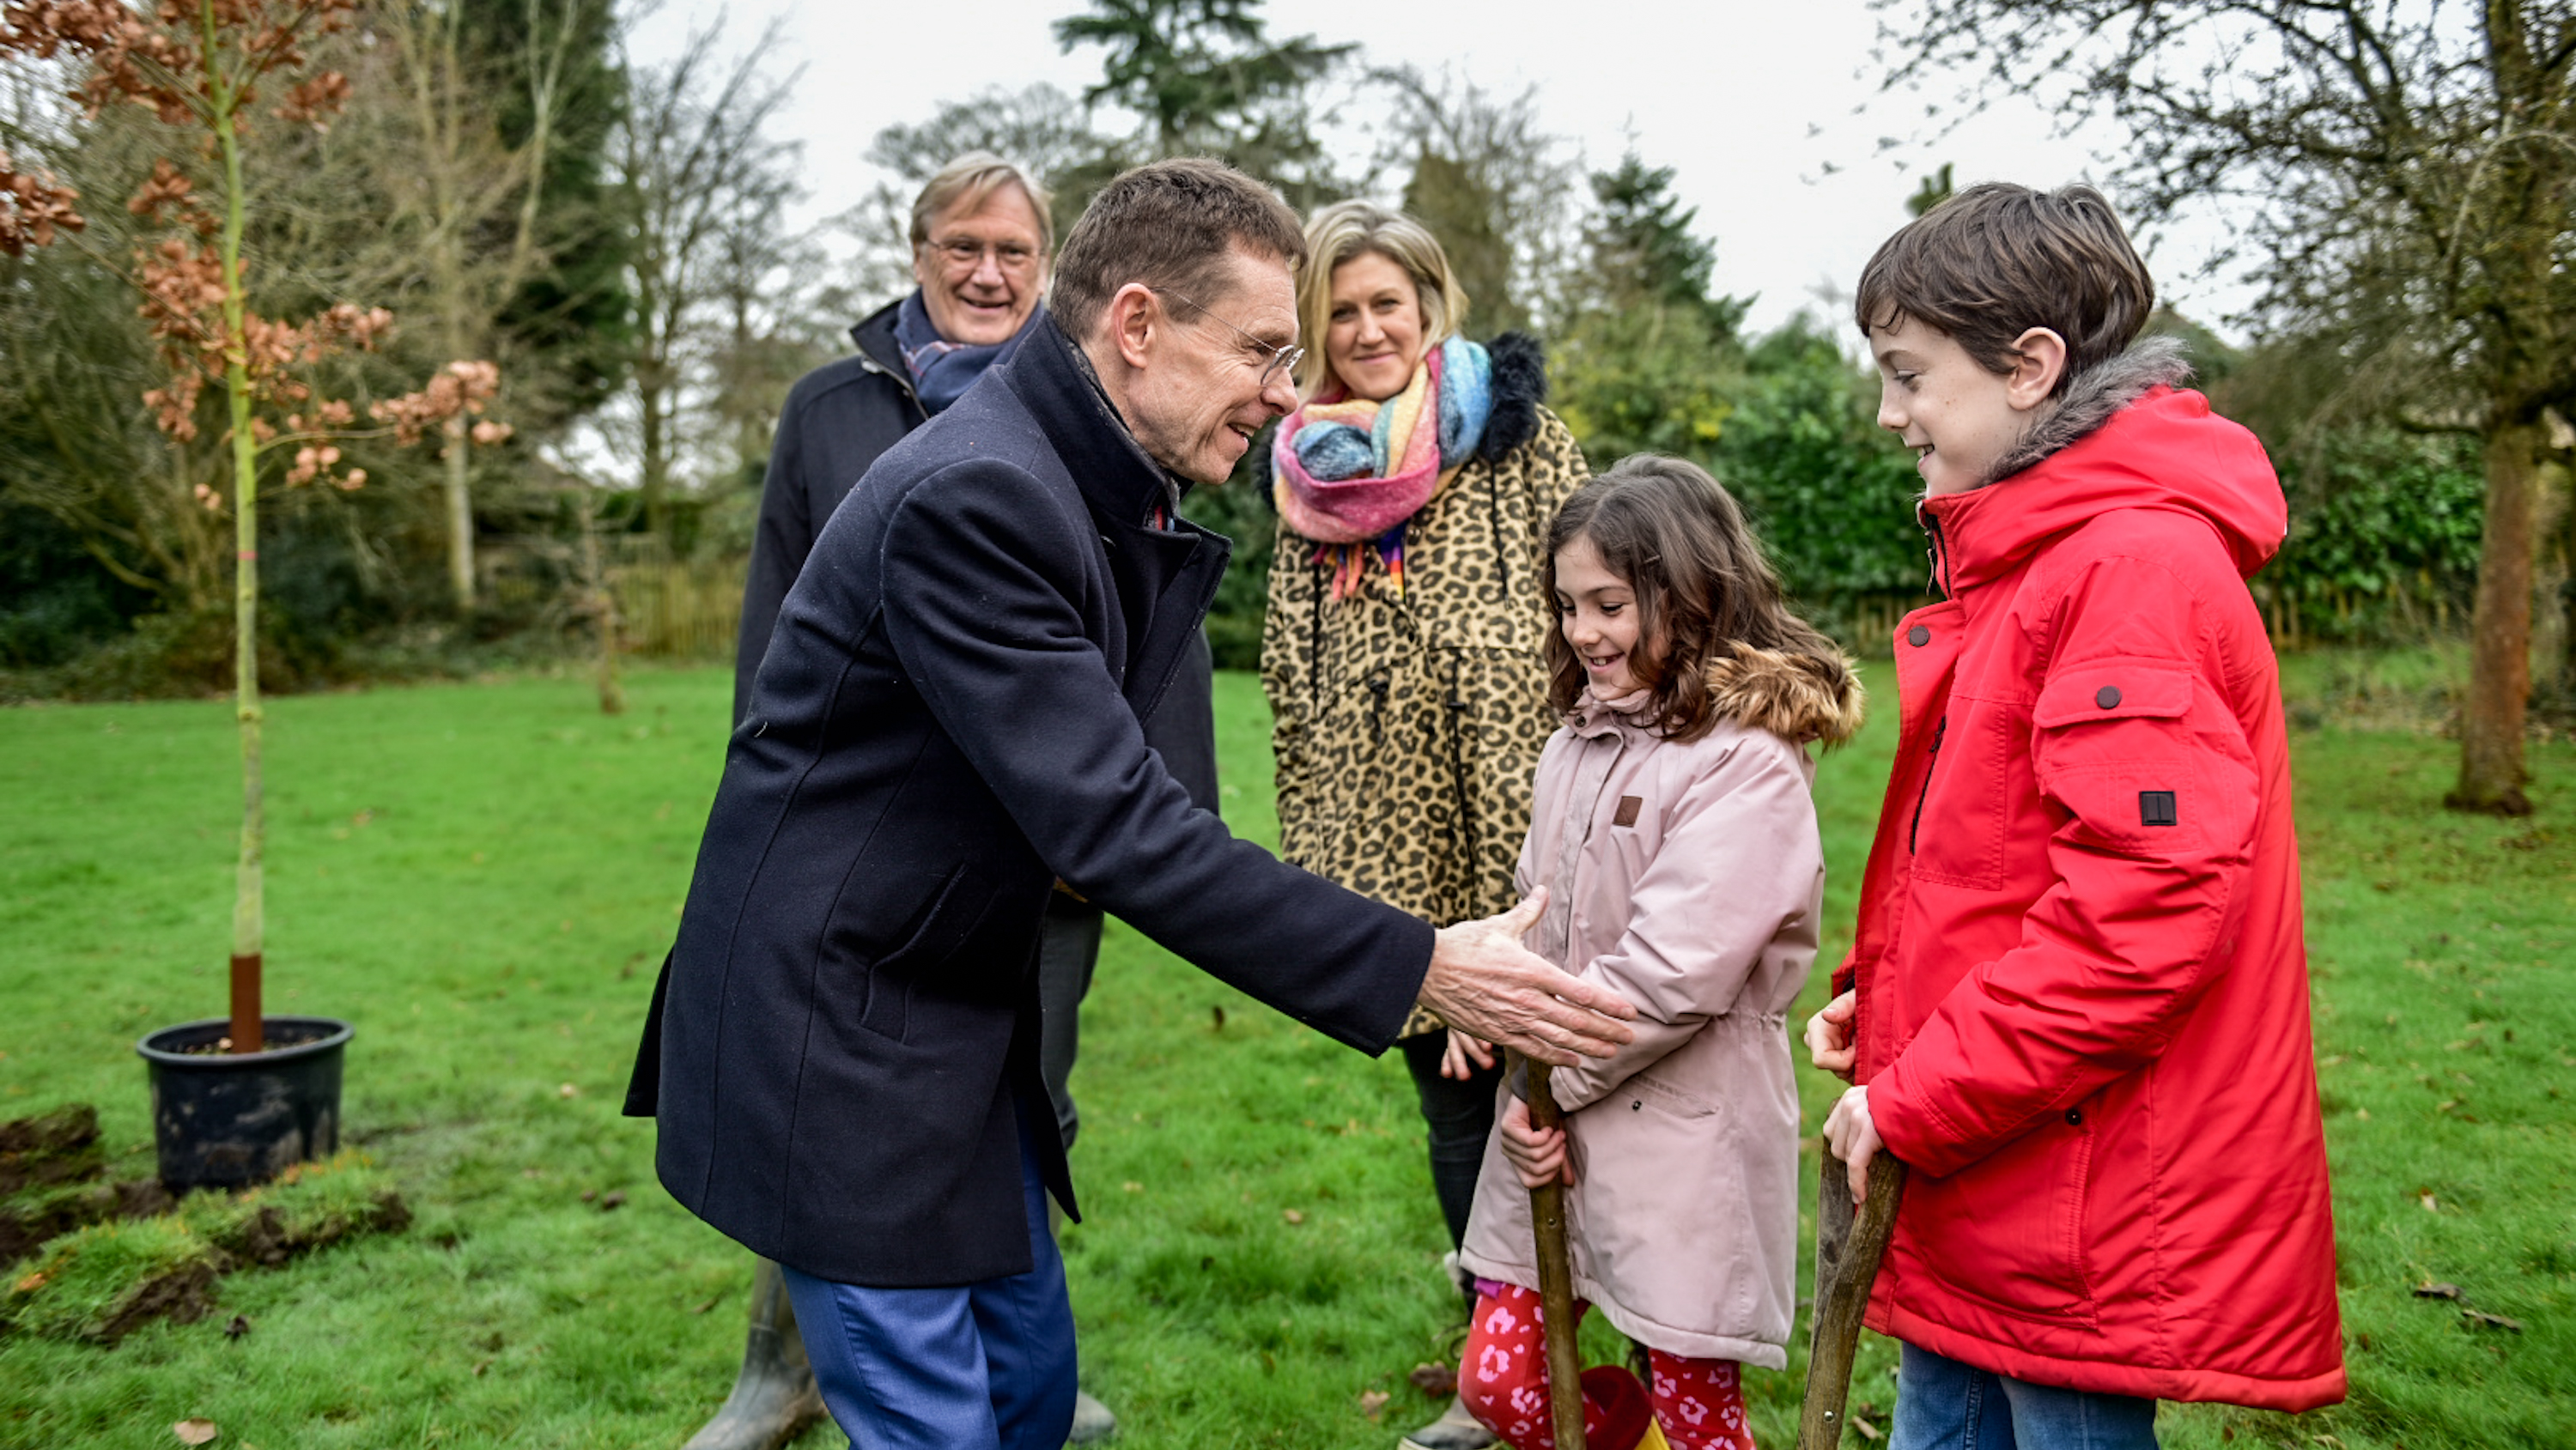 Pictured planting trees at Malvern Park, Solihull, are (L-R) Cllr Ian Courts, leader of Solihull Council and WMCA portfolio holder for the environment, Mayor of the West Midlands Andy Street, Carly Uttridge of Wonder Woods Forest School and her children Mabel and George